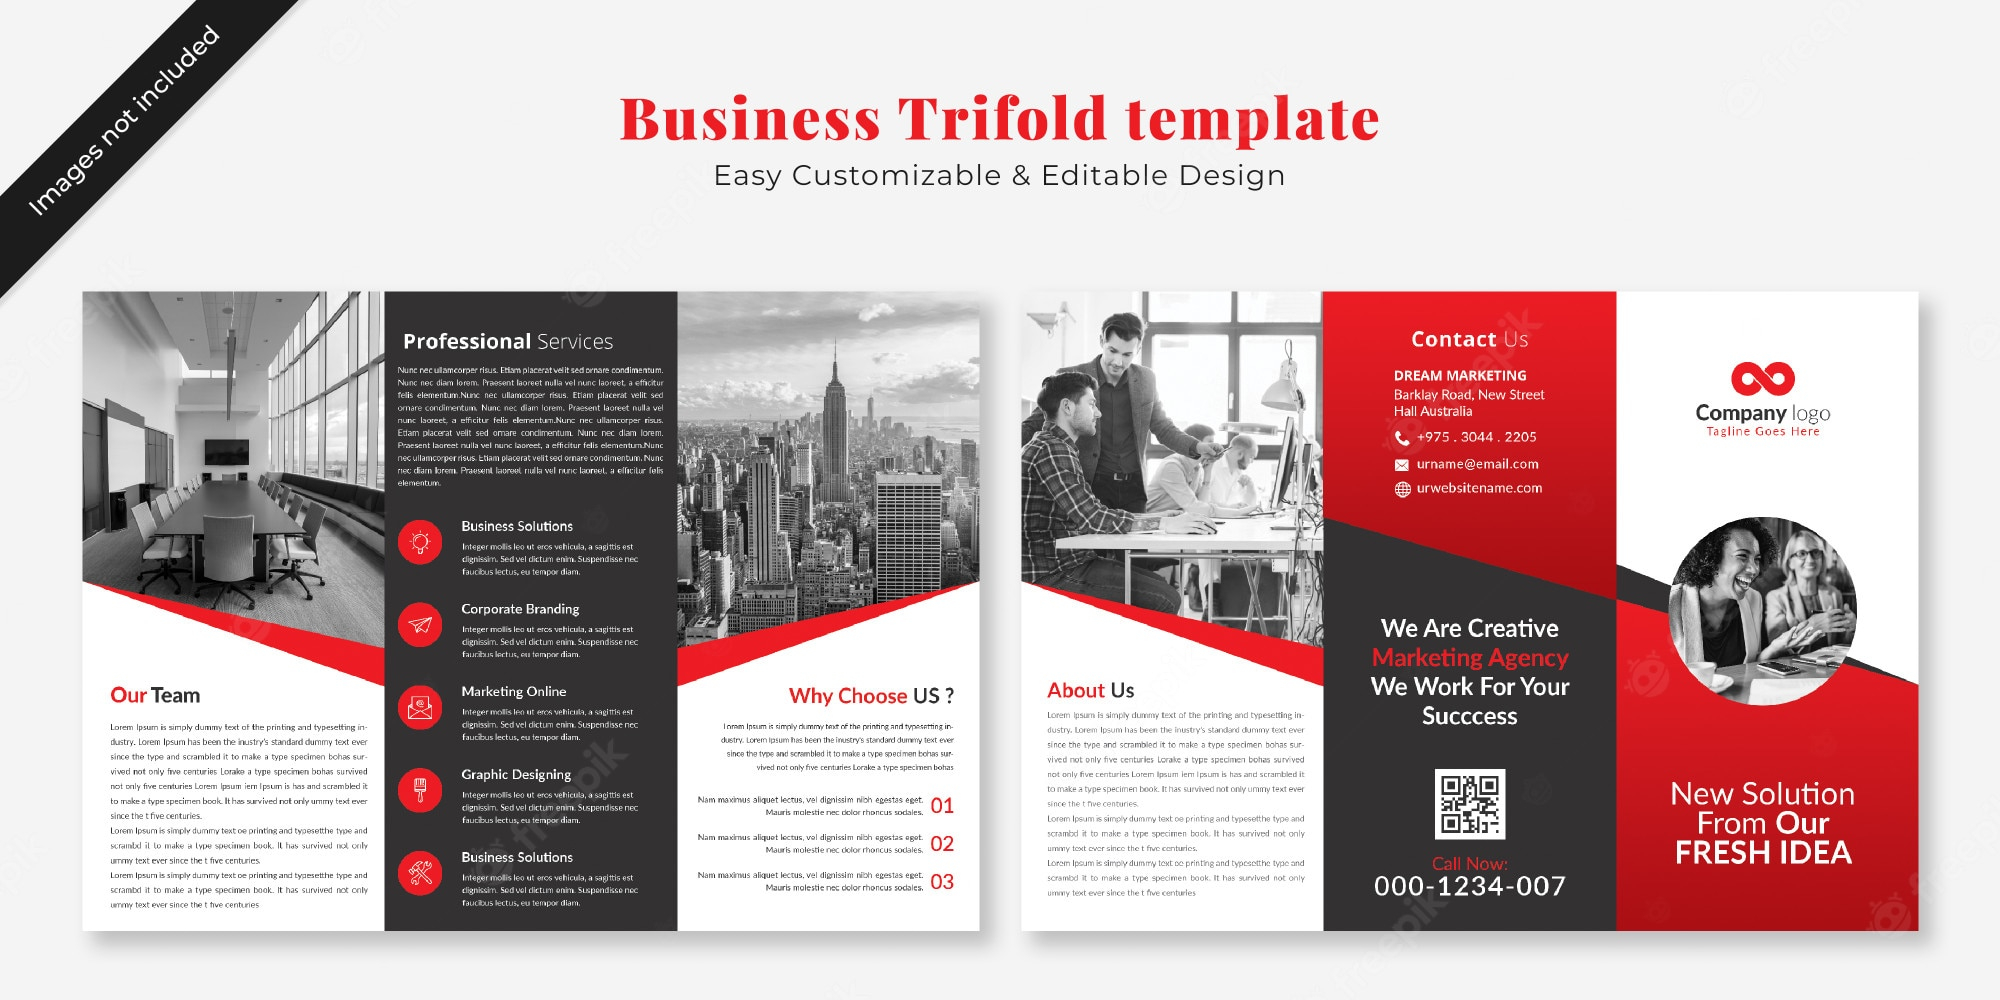 Trifold brochure Images  Free Vectors, Stock Photos & PSD Throughout Free Tri Fold Business Brochure Templates